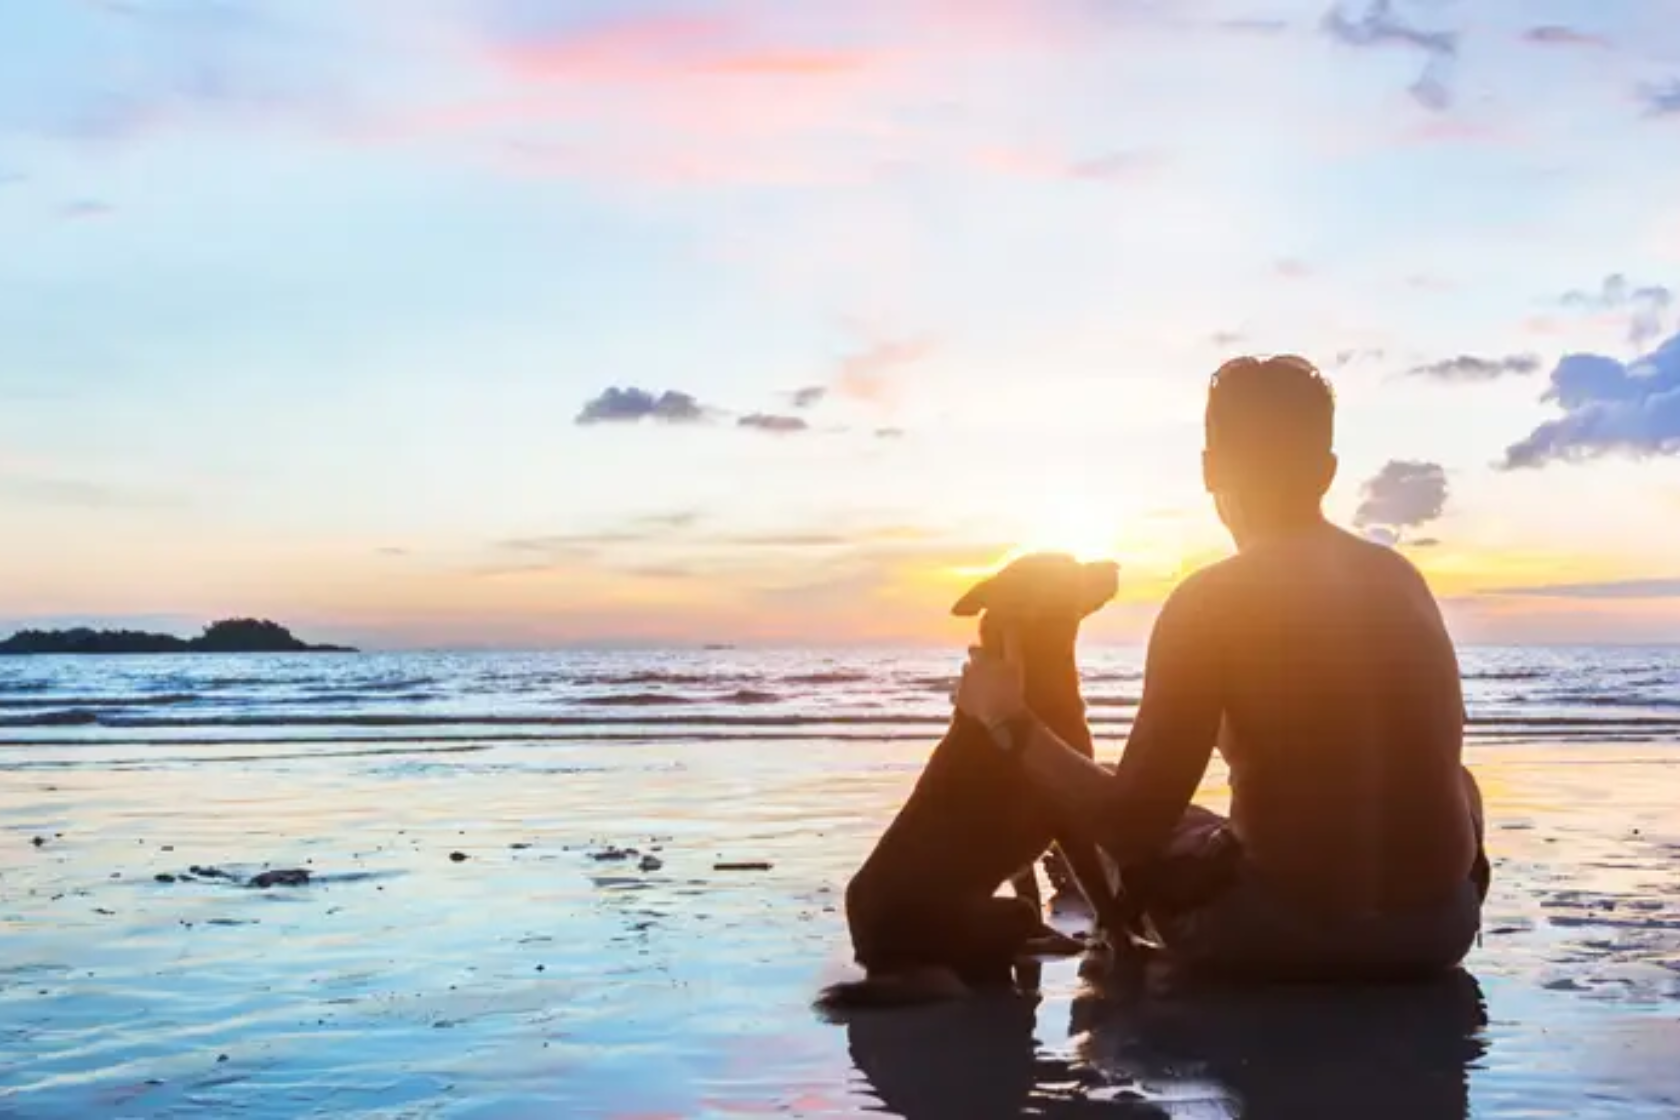 Silhouette of a man and dog sat together with a sunset in the background